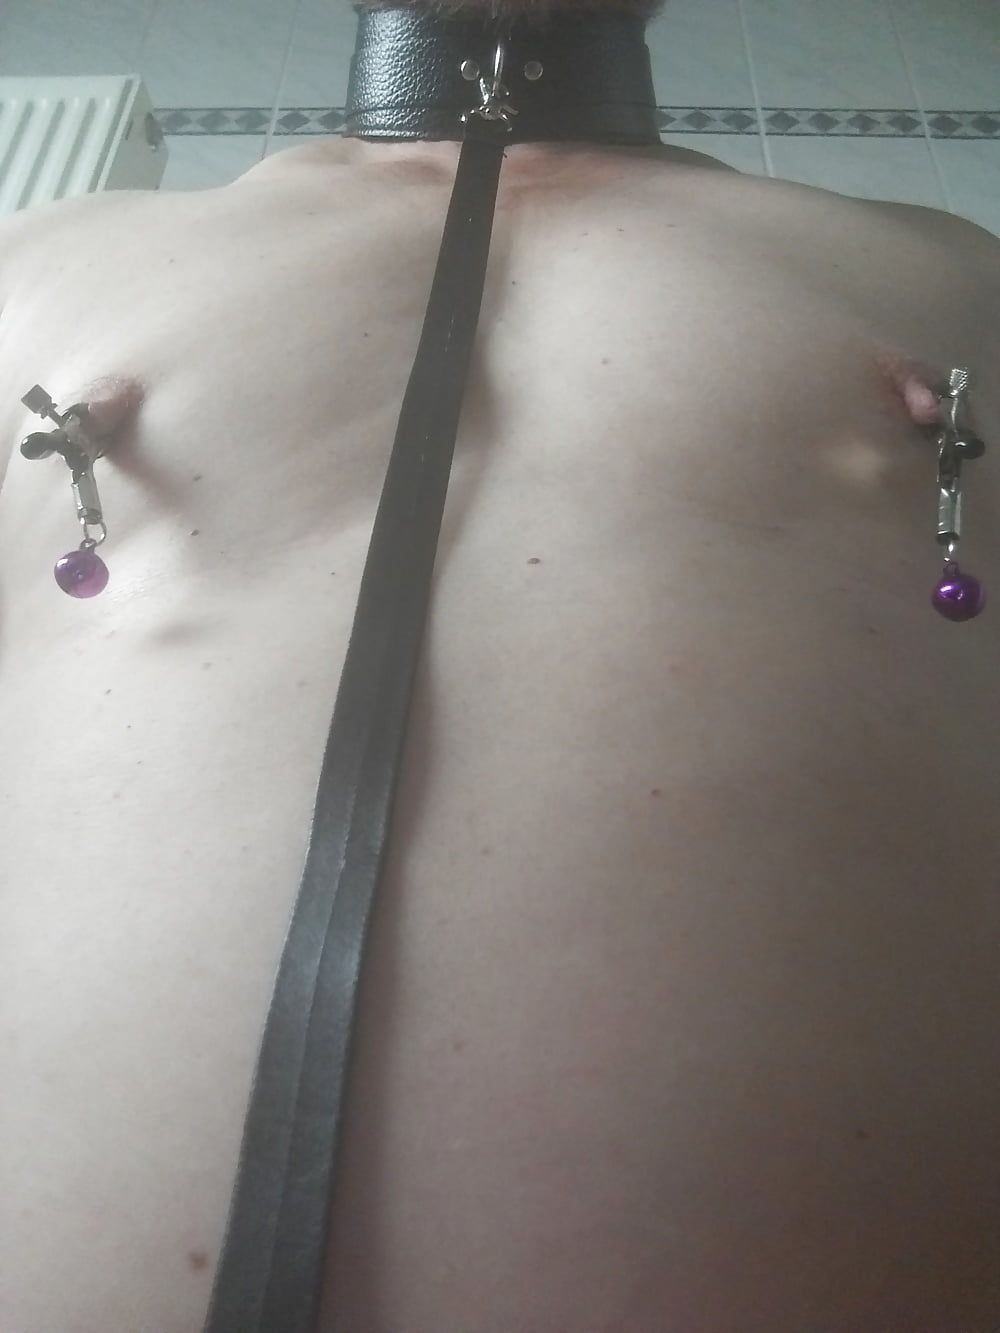 Nippleplay with Clamps #9